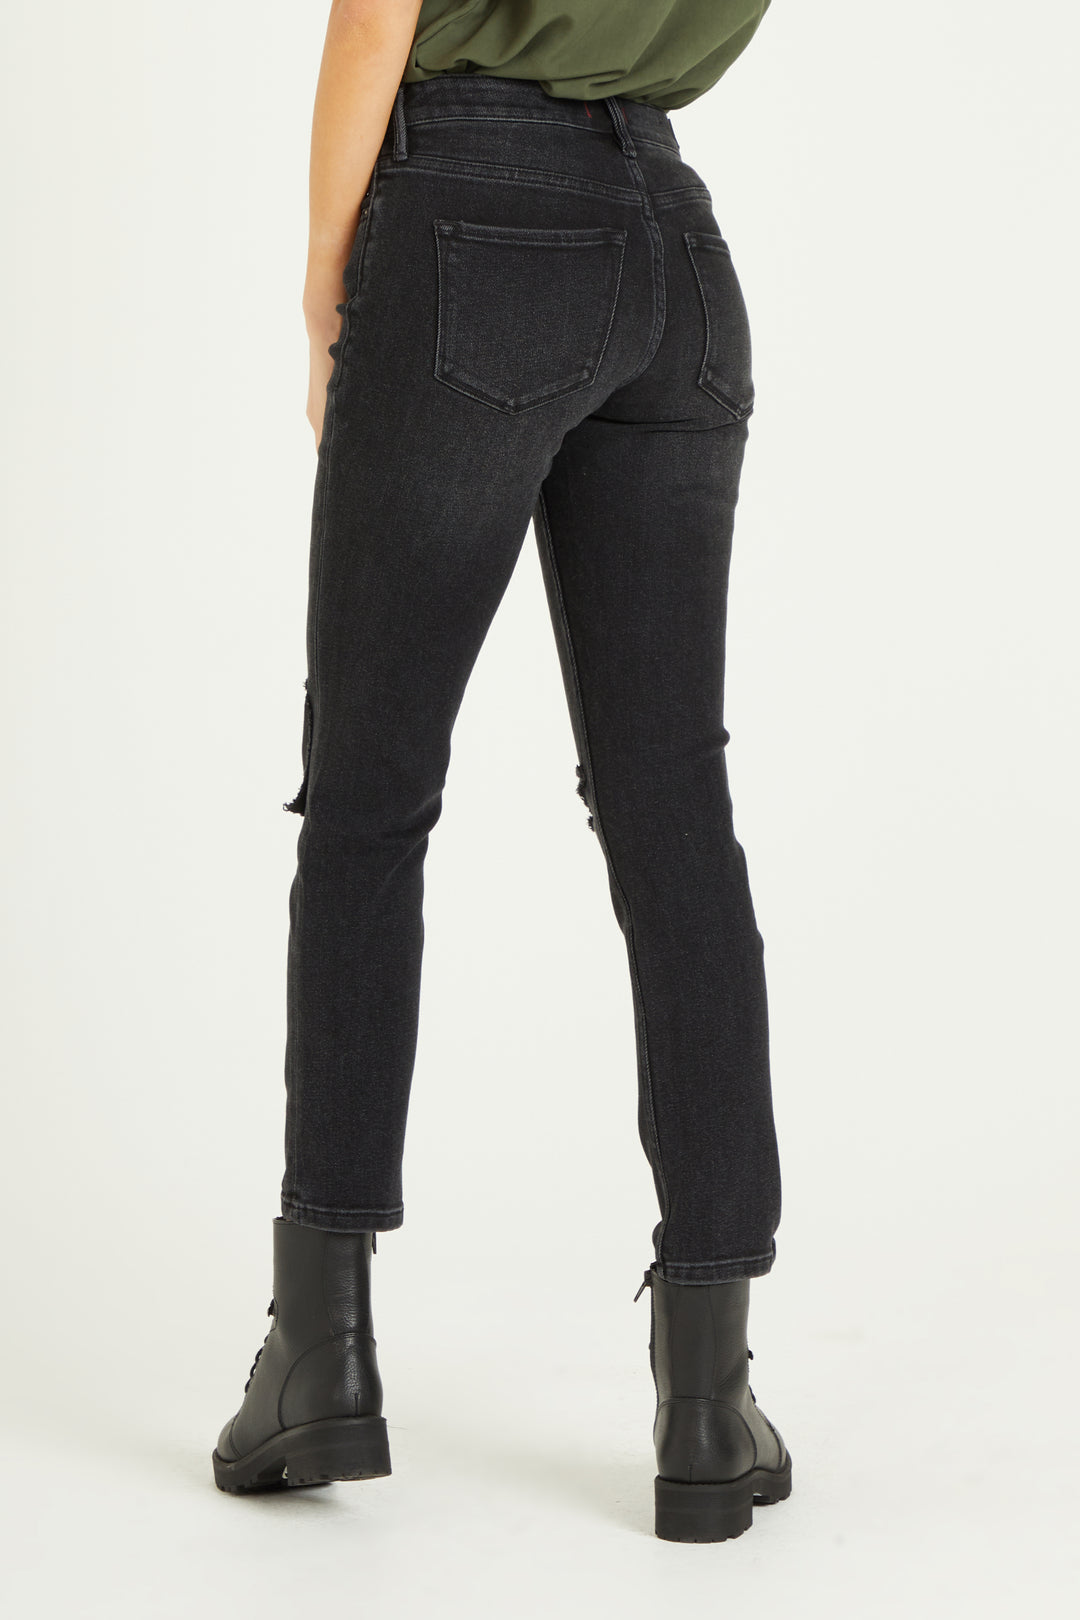 image of a female model wearing a 9 1/2" HIGH RISE AIDEN GIRLFRIEND IN ALBANY JEANS